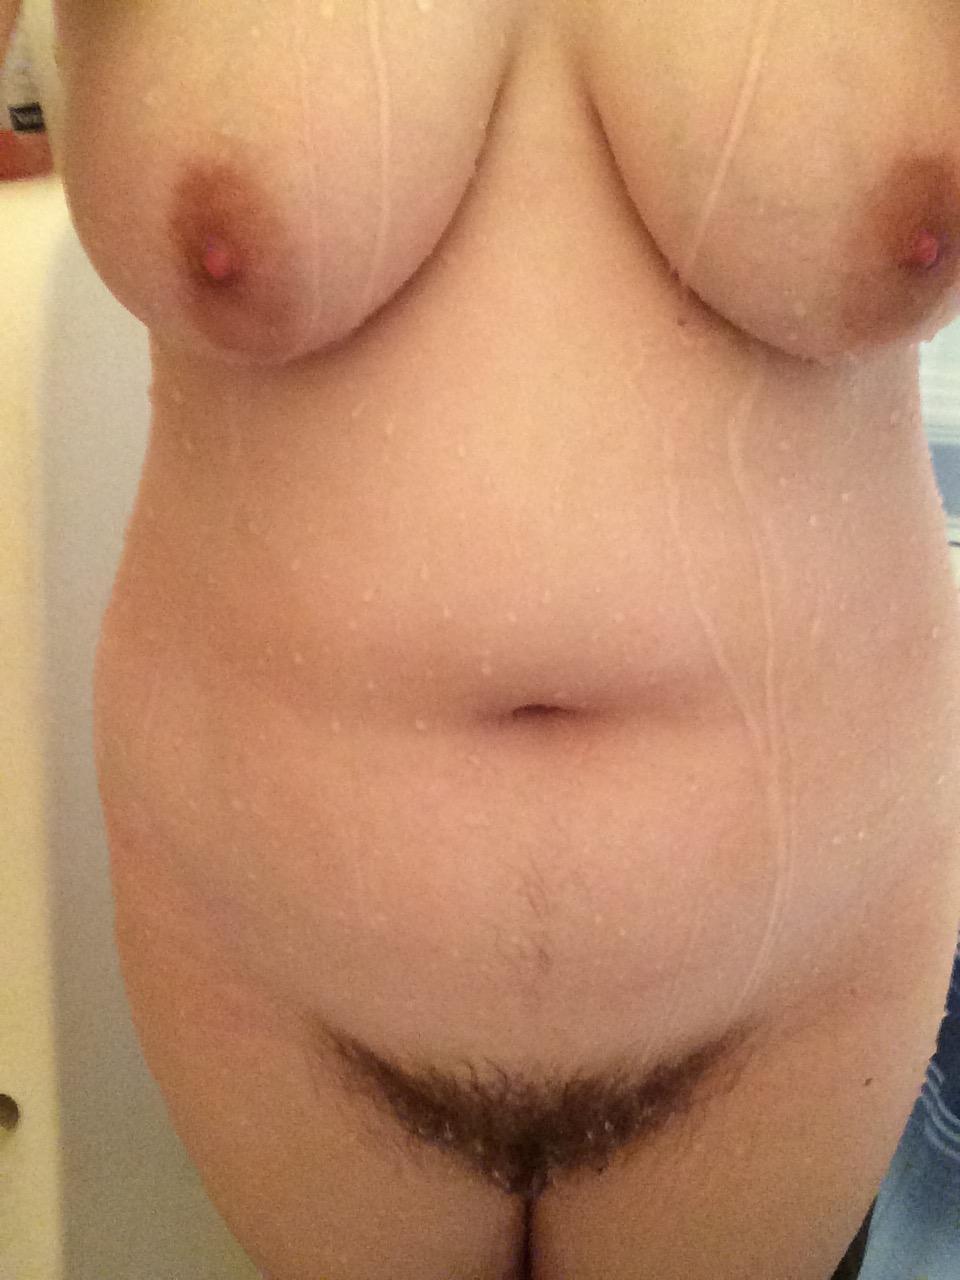 Getting all clean (f)or the day.